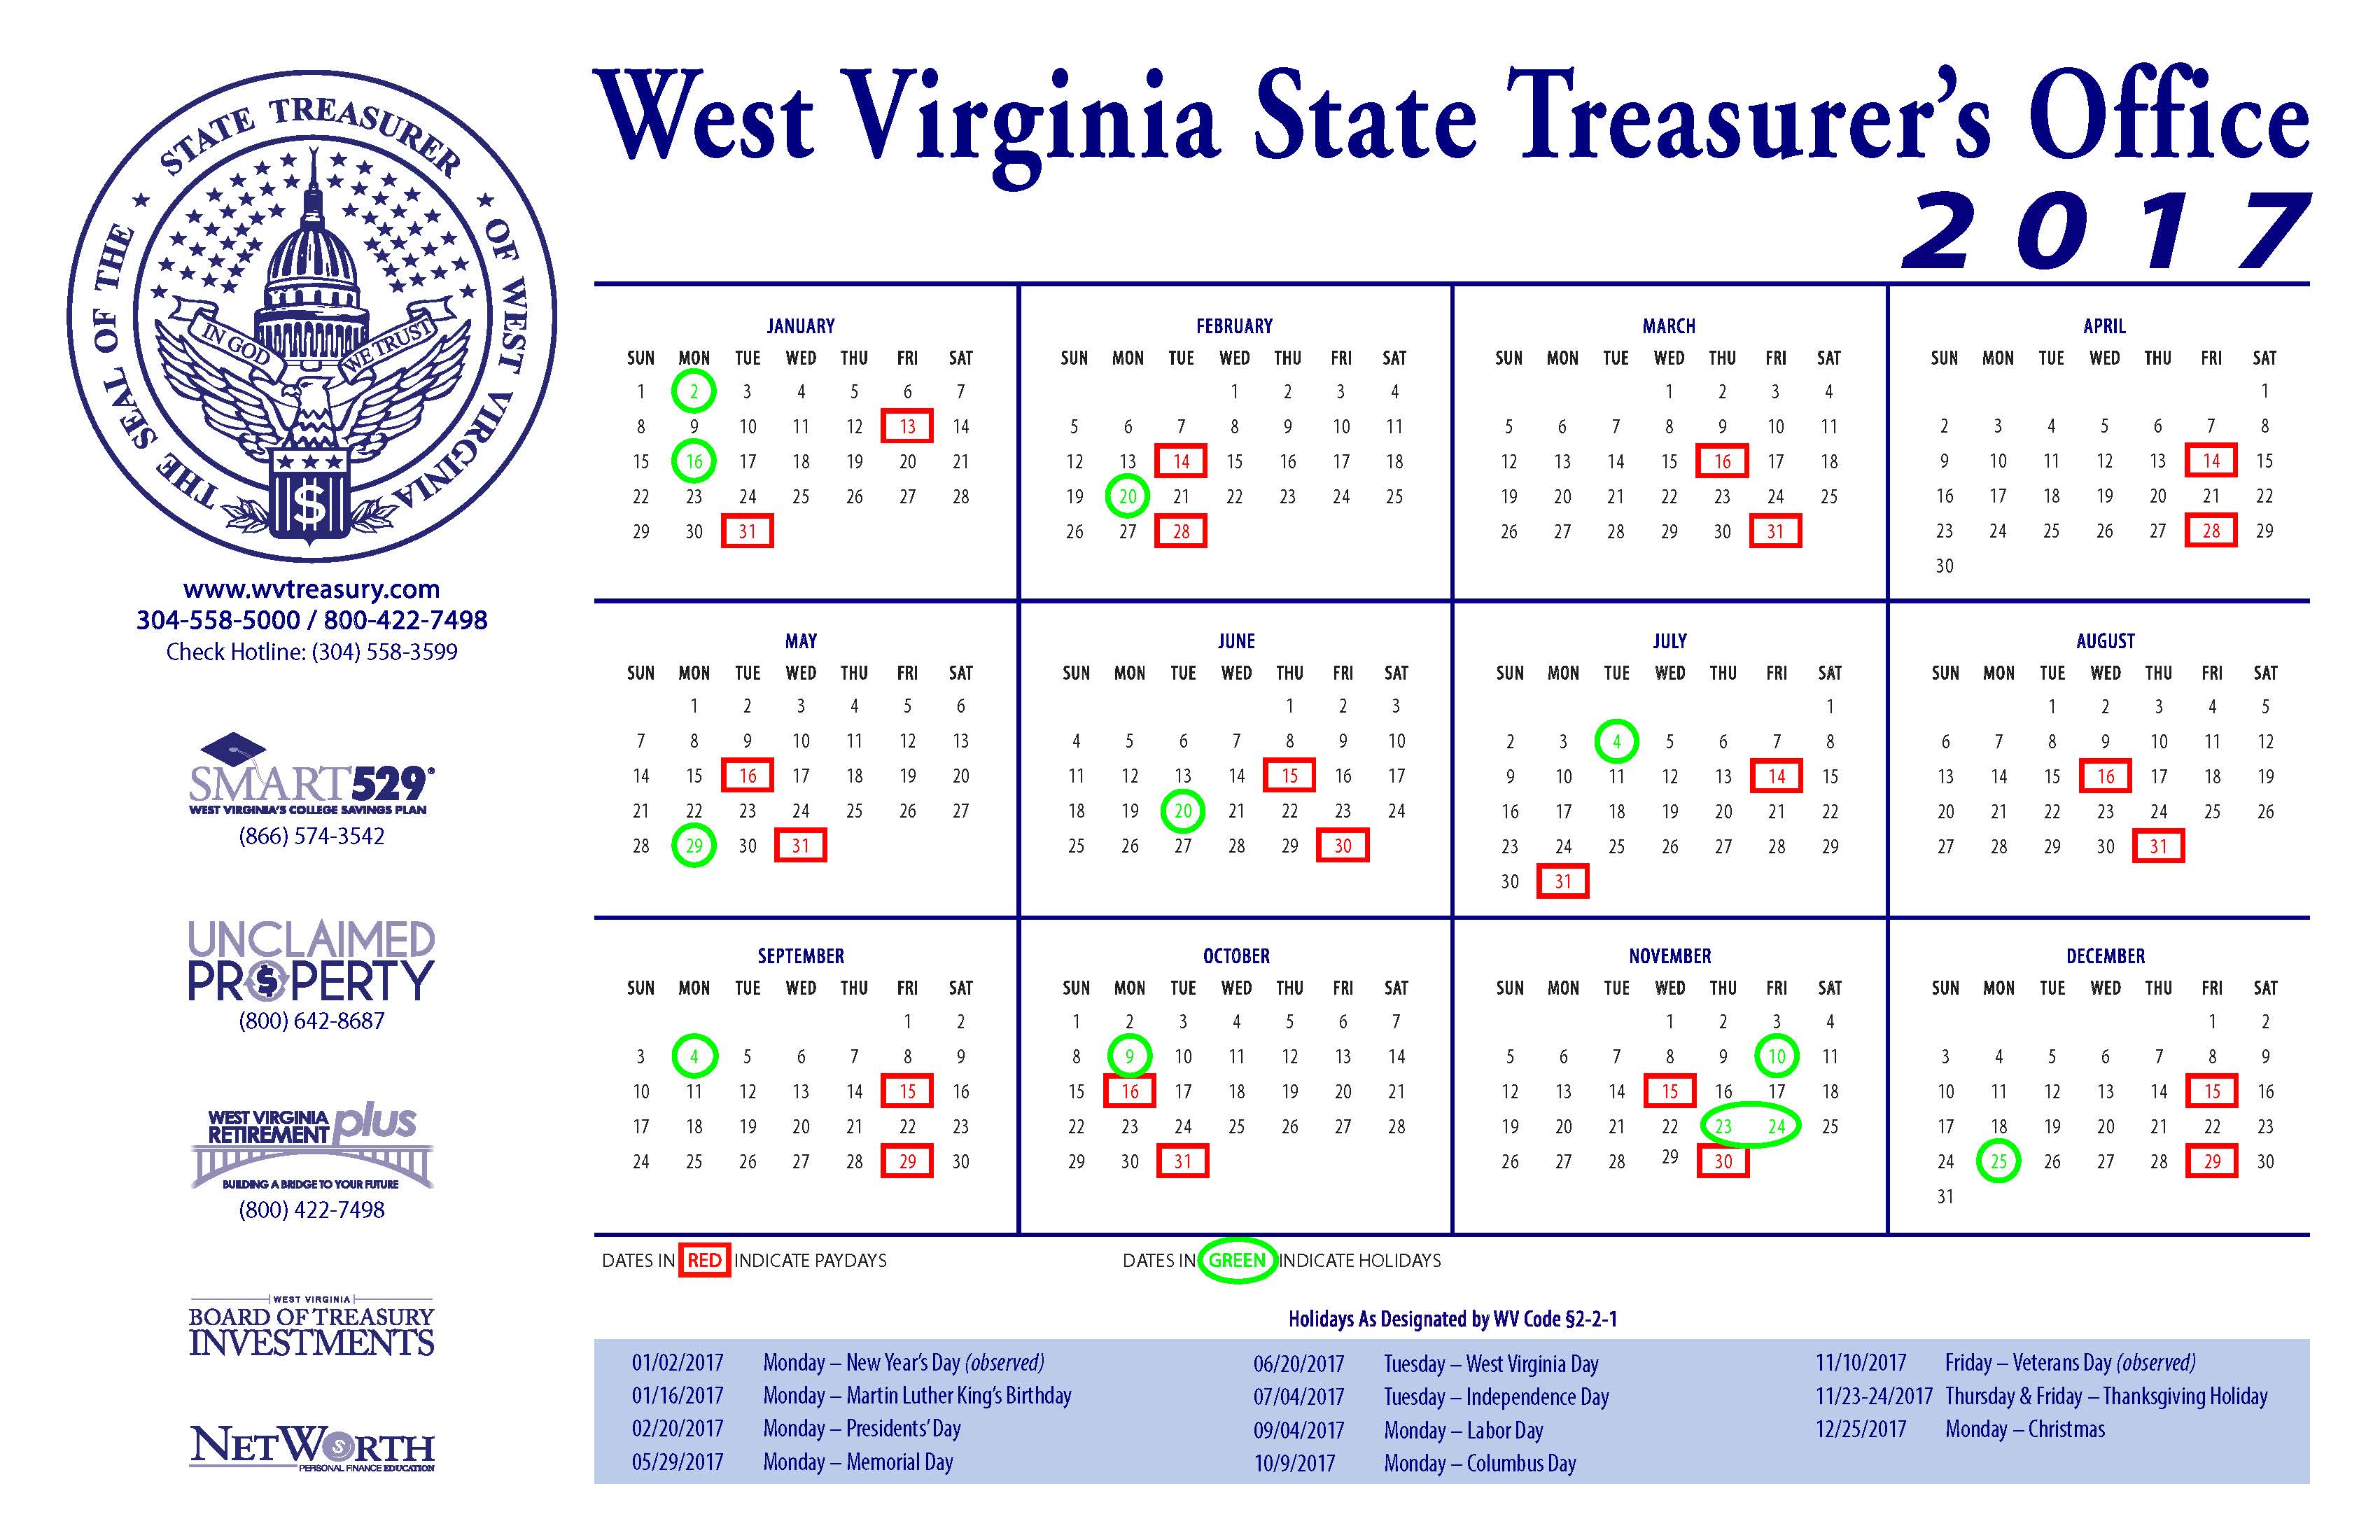 West Virginia State Treasurer's Office > About The Office > Contact Us